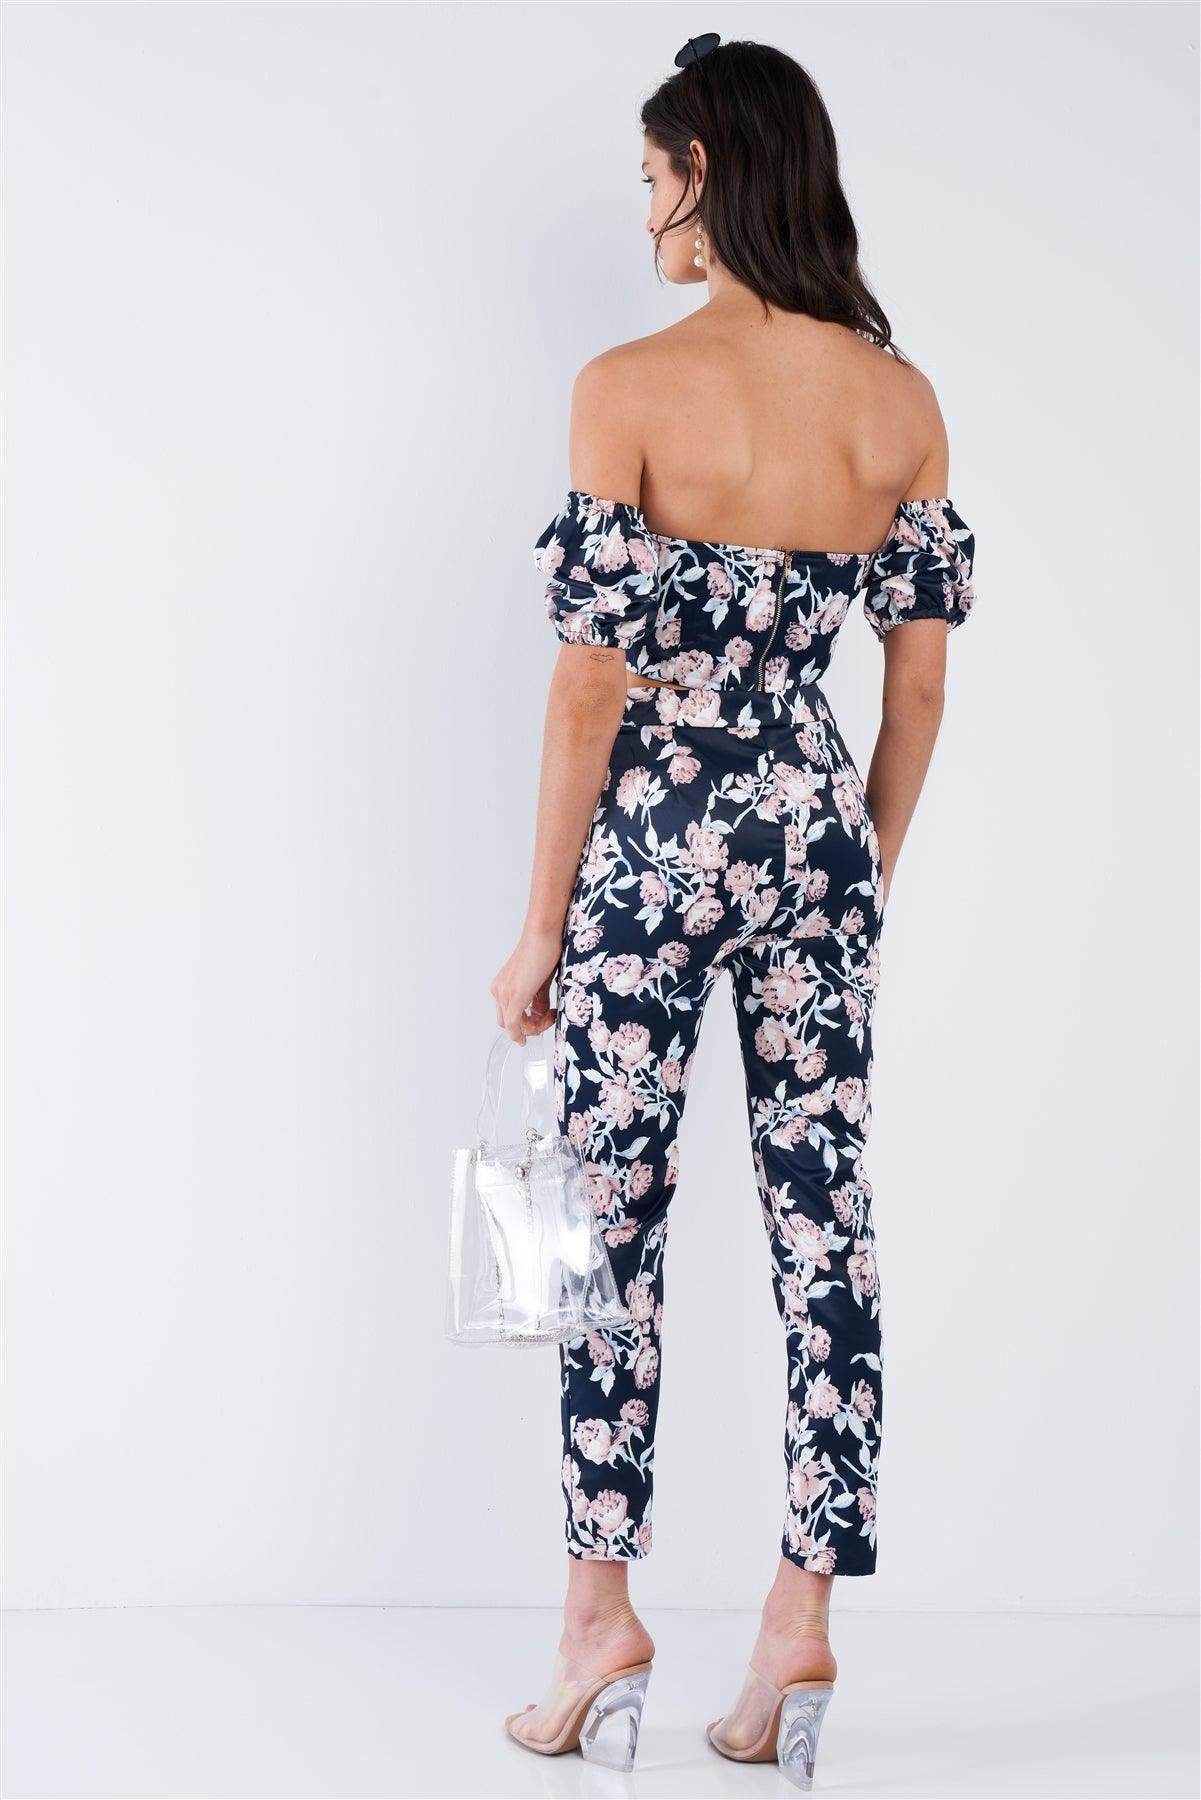 Ensign Blue Mixed Floral Off The Shoulder Lace Up Crop Top & High Waist Ankle Length Pant Set  /2-2-2